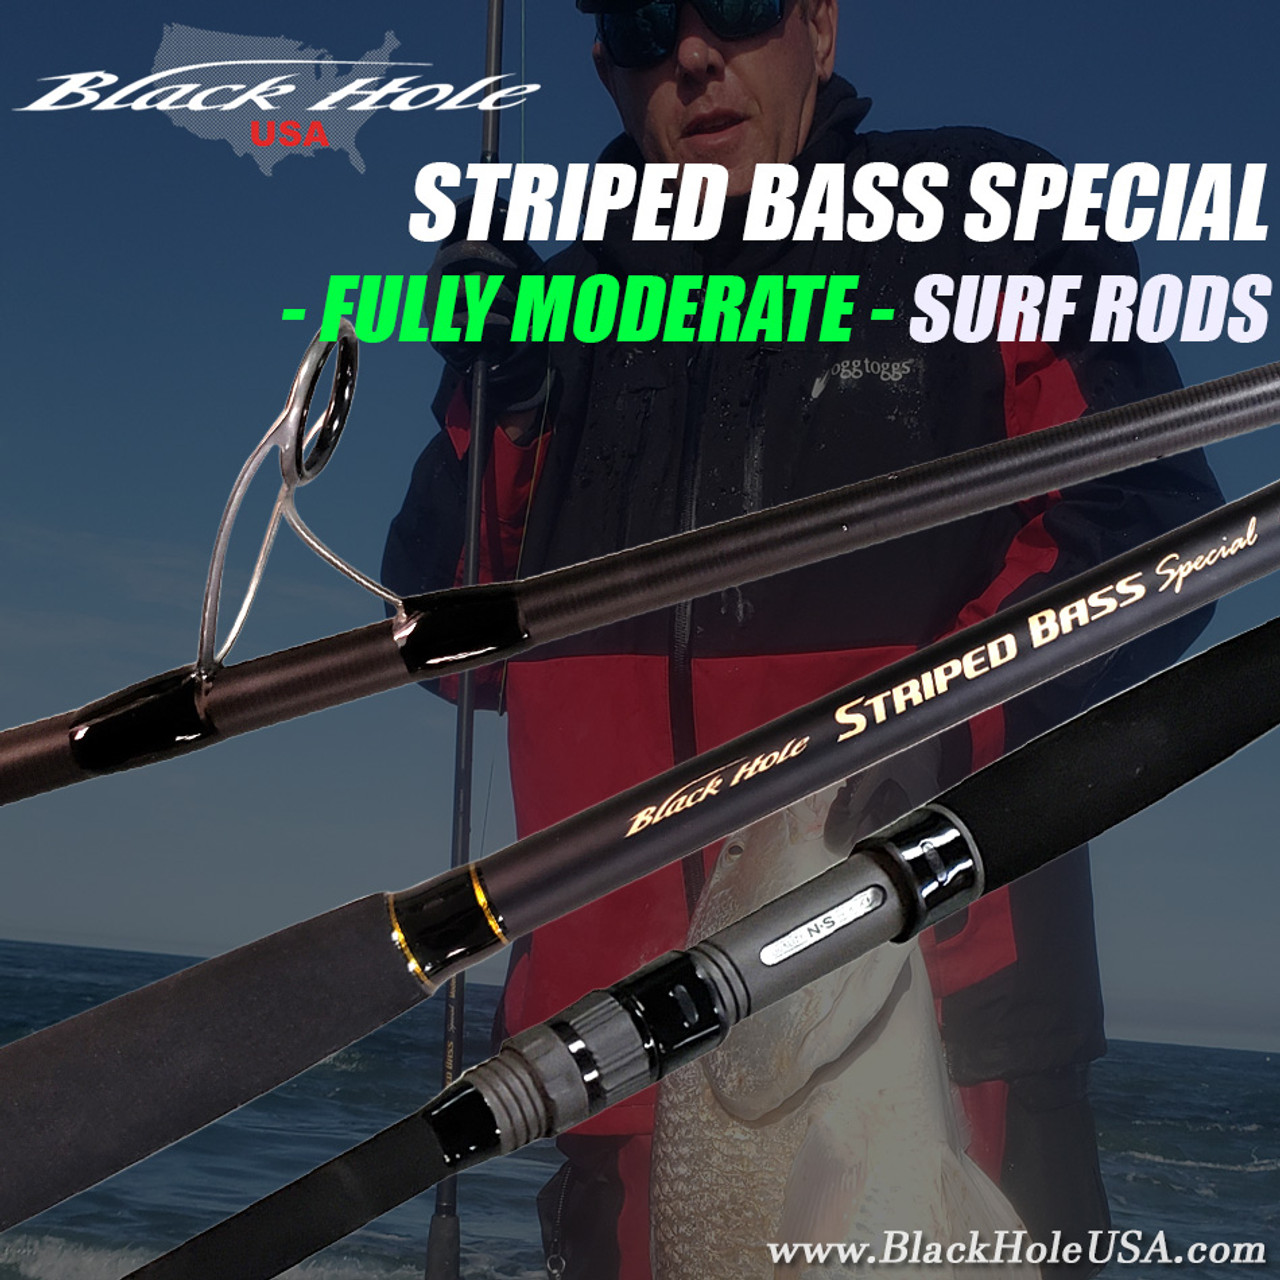 https://cdn11.bigcommerce.com/s-d32ed/images/stencil/1280x1280/products/798/3872/BH_STRIPED_BASS_ROD_FRONT_FULLY_MODERATE_ACTION__31123.1675201250.jpg?c=2